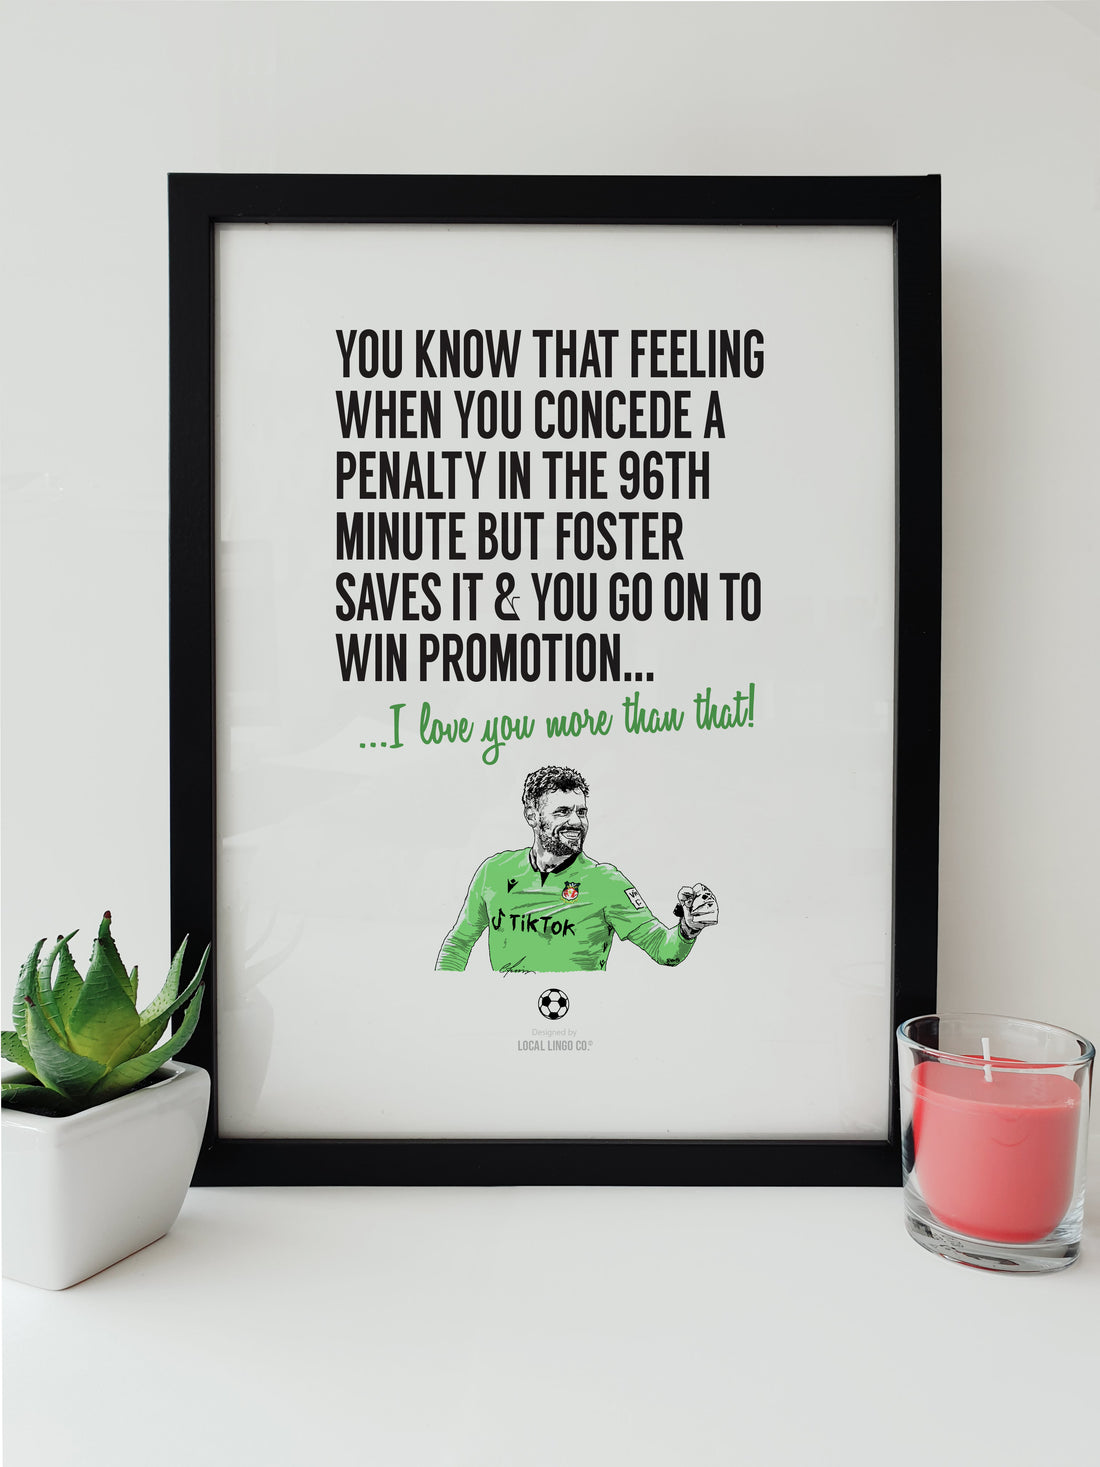 Wrexham A.F.C. Penalty Hero Print - Capturing Ben Foster's epic save in the 96th minute for promotion against Notts County